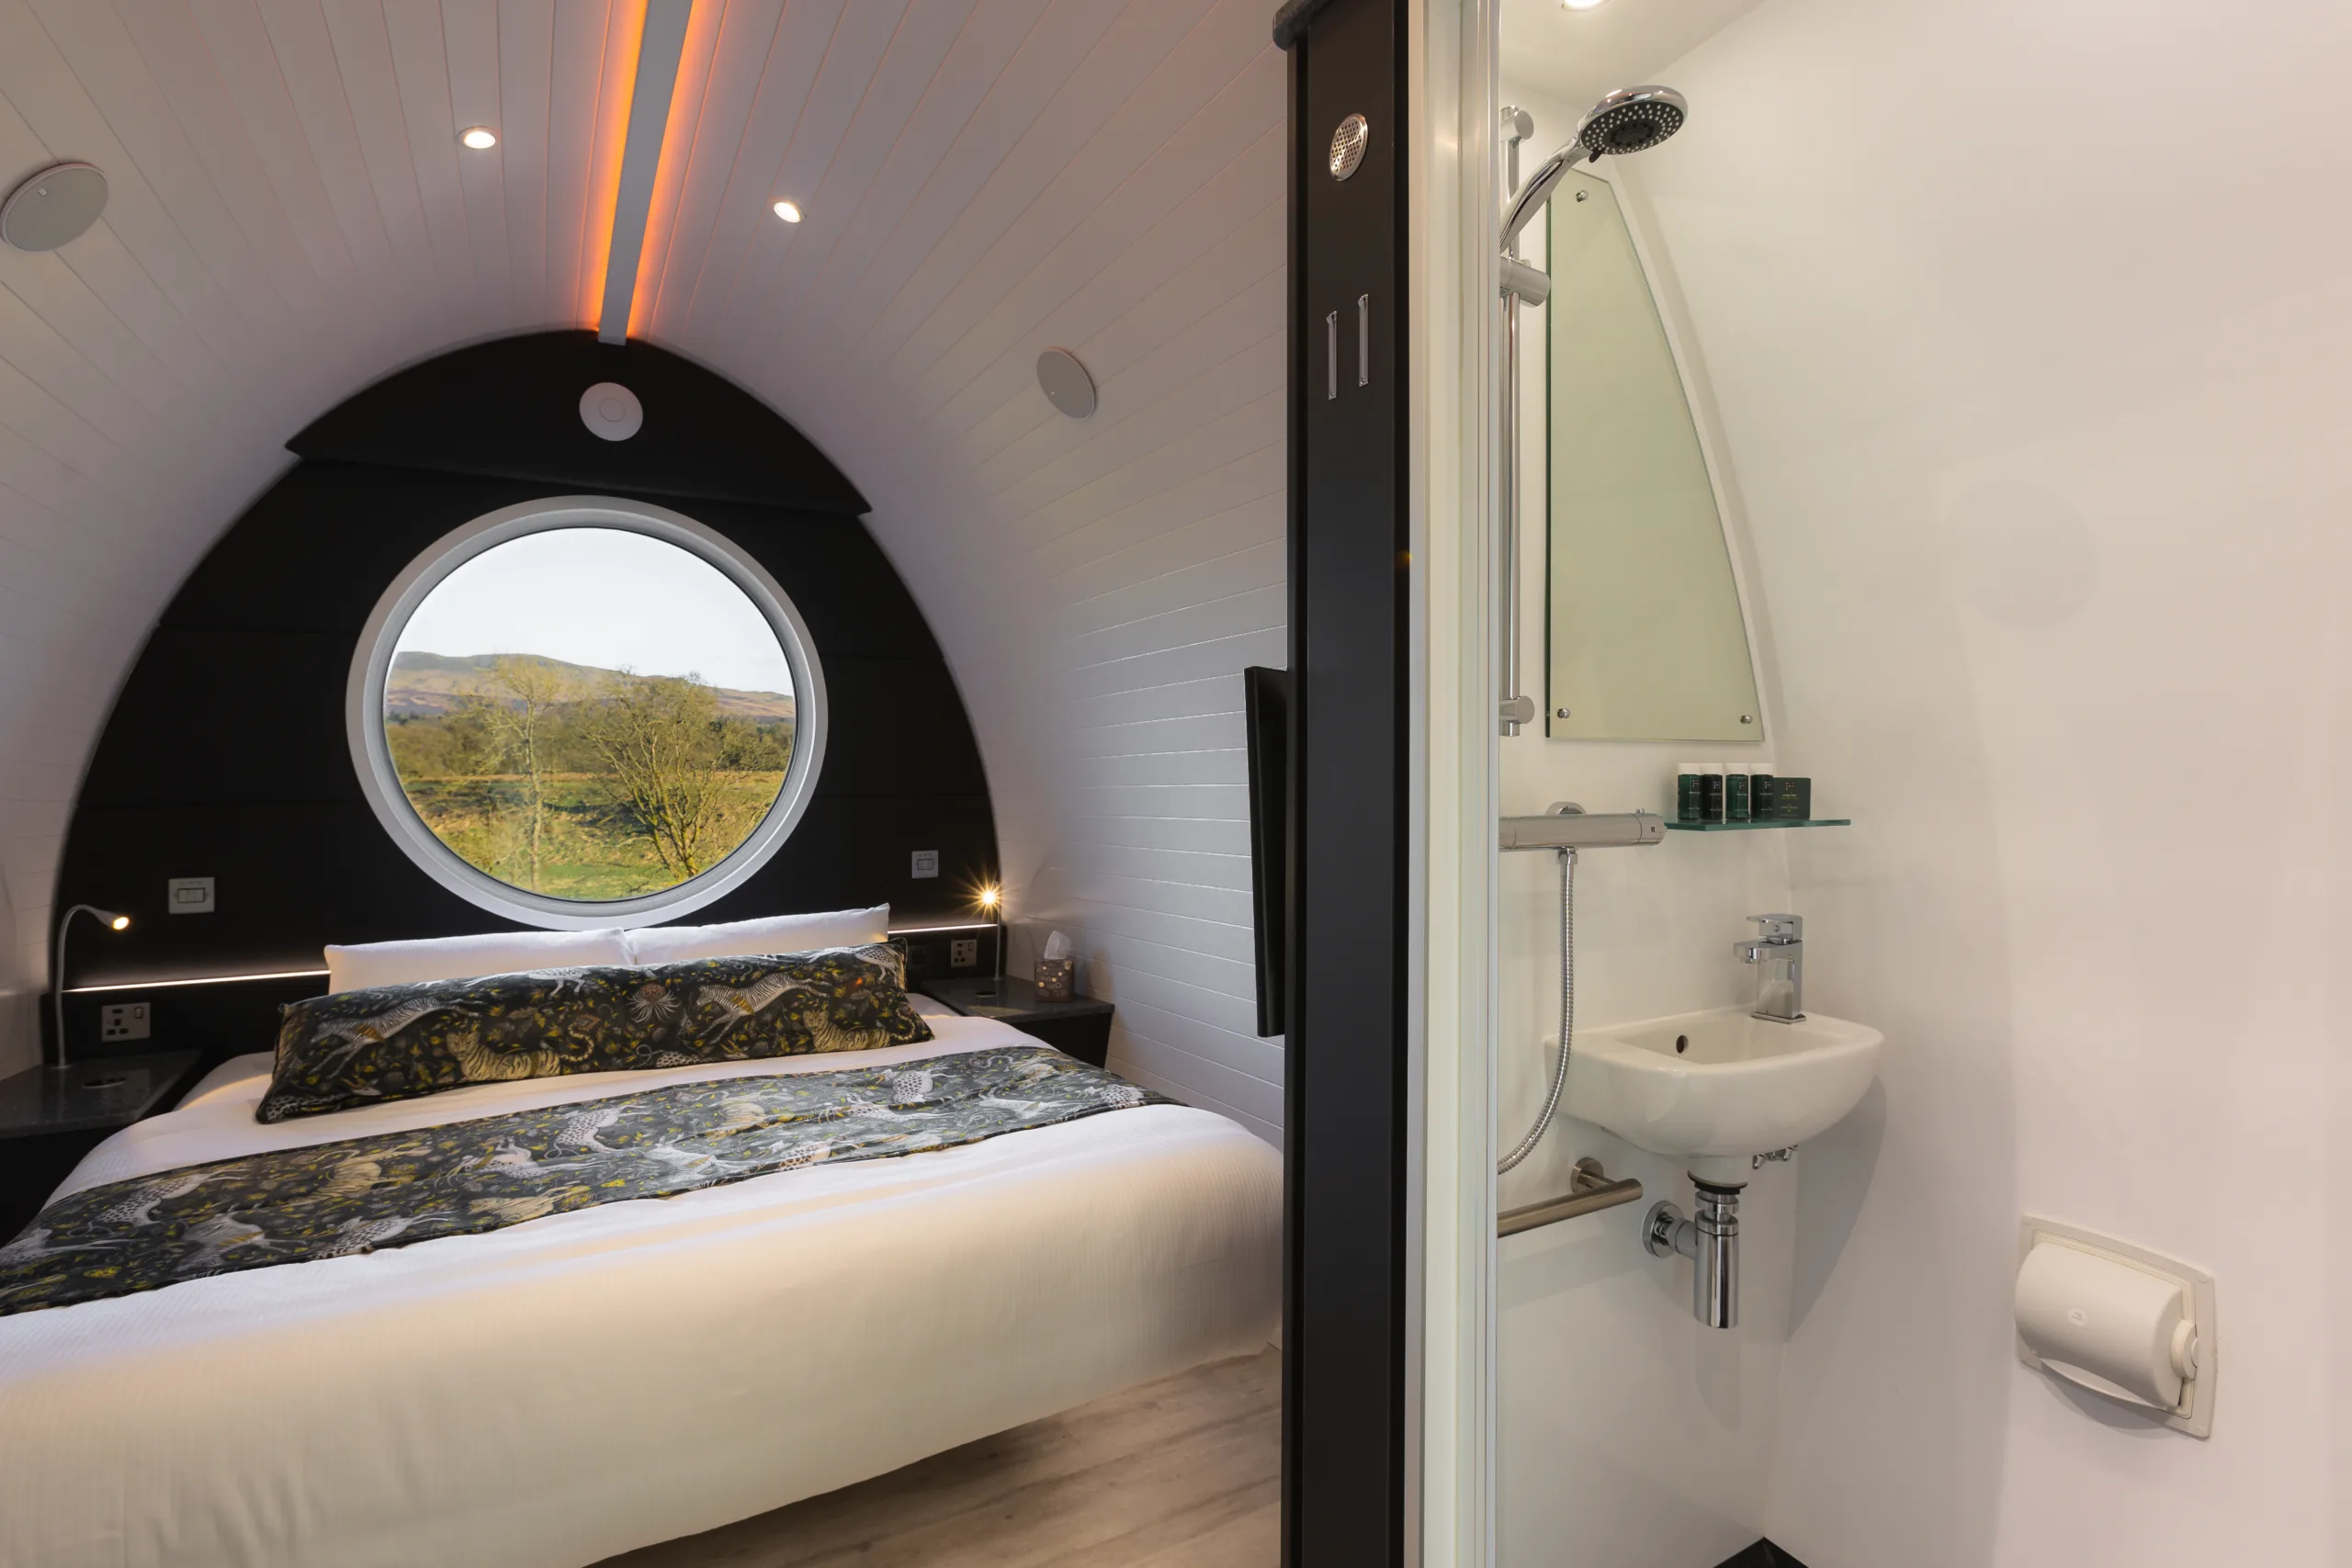 Inside Endrick Escape glamping pods showing bathroom, bed and view from pod window